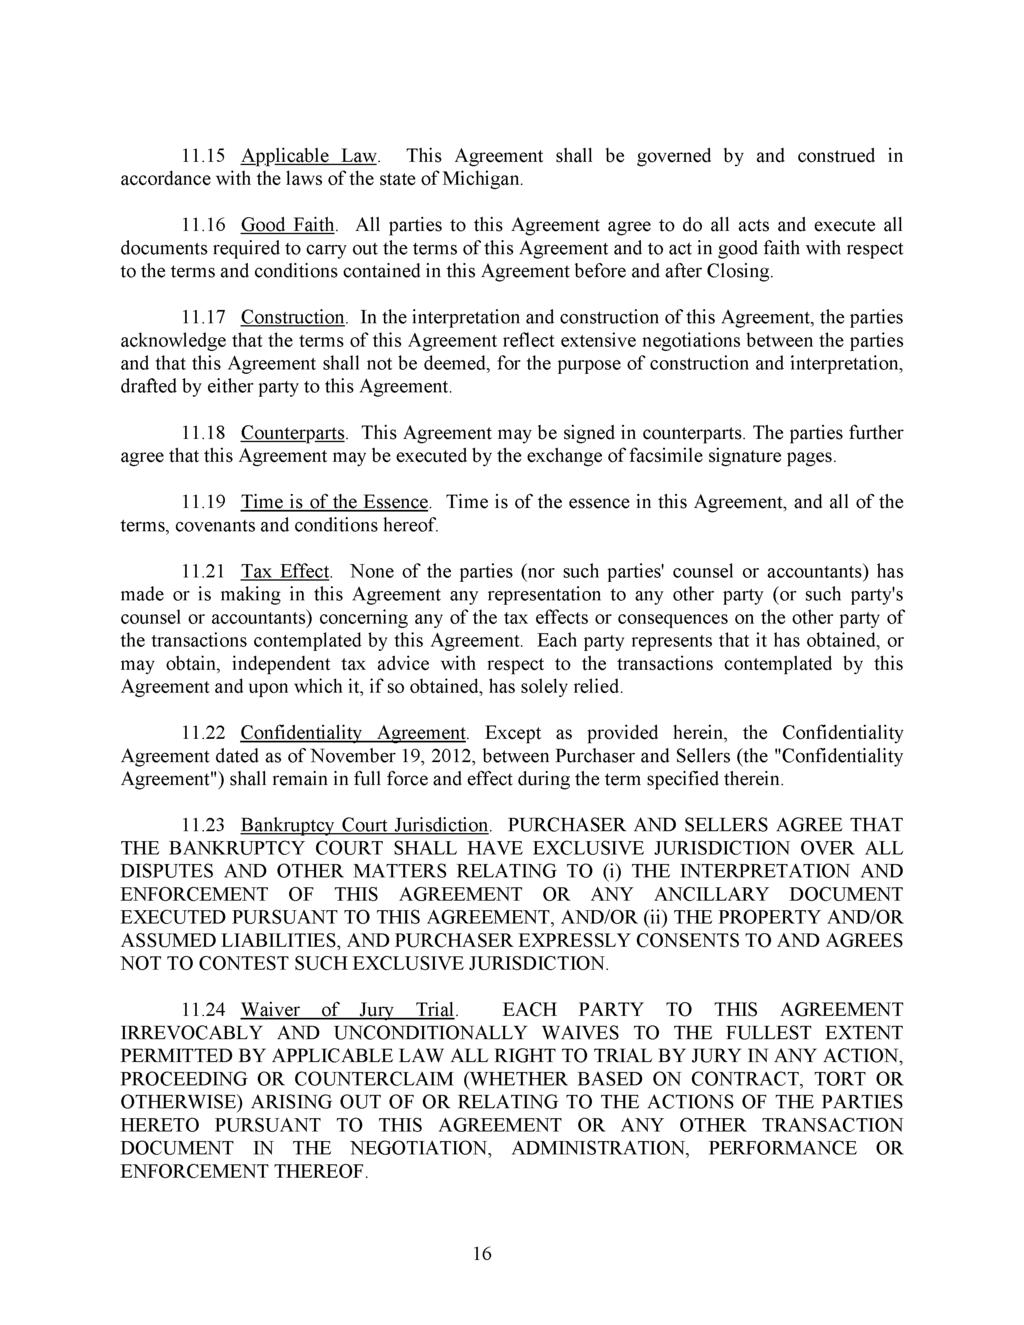 Case:12-10410-swd Doc #:265-1 Filed: 01/17/13 Page 16 of 18 11.15 Applicable Law. This Agreement shall be governed by and construed in accordance with the laws of the state of Michigan. 11.16 Good Faith.